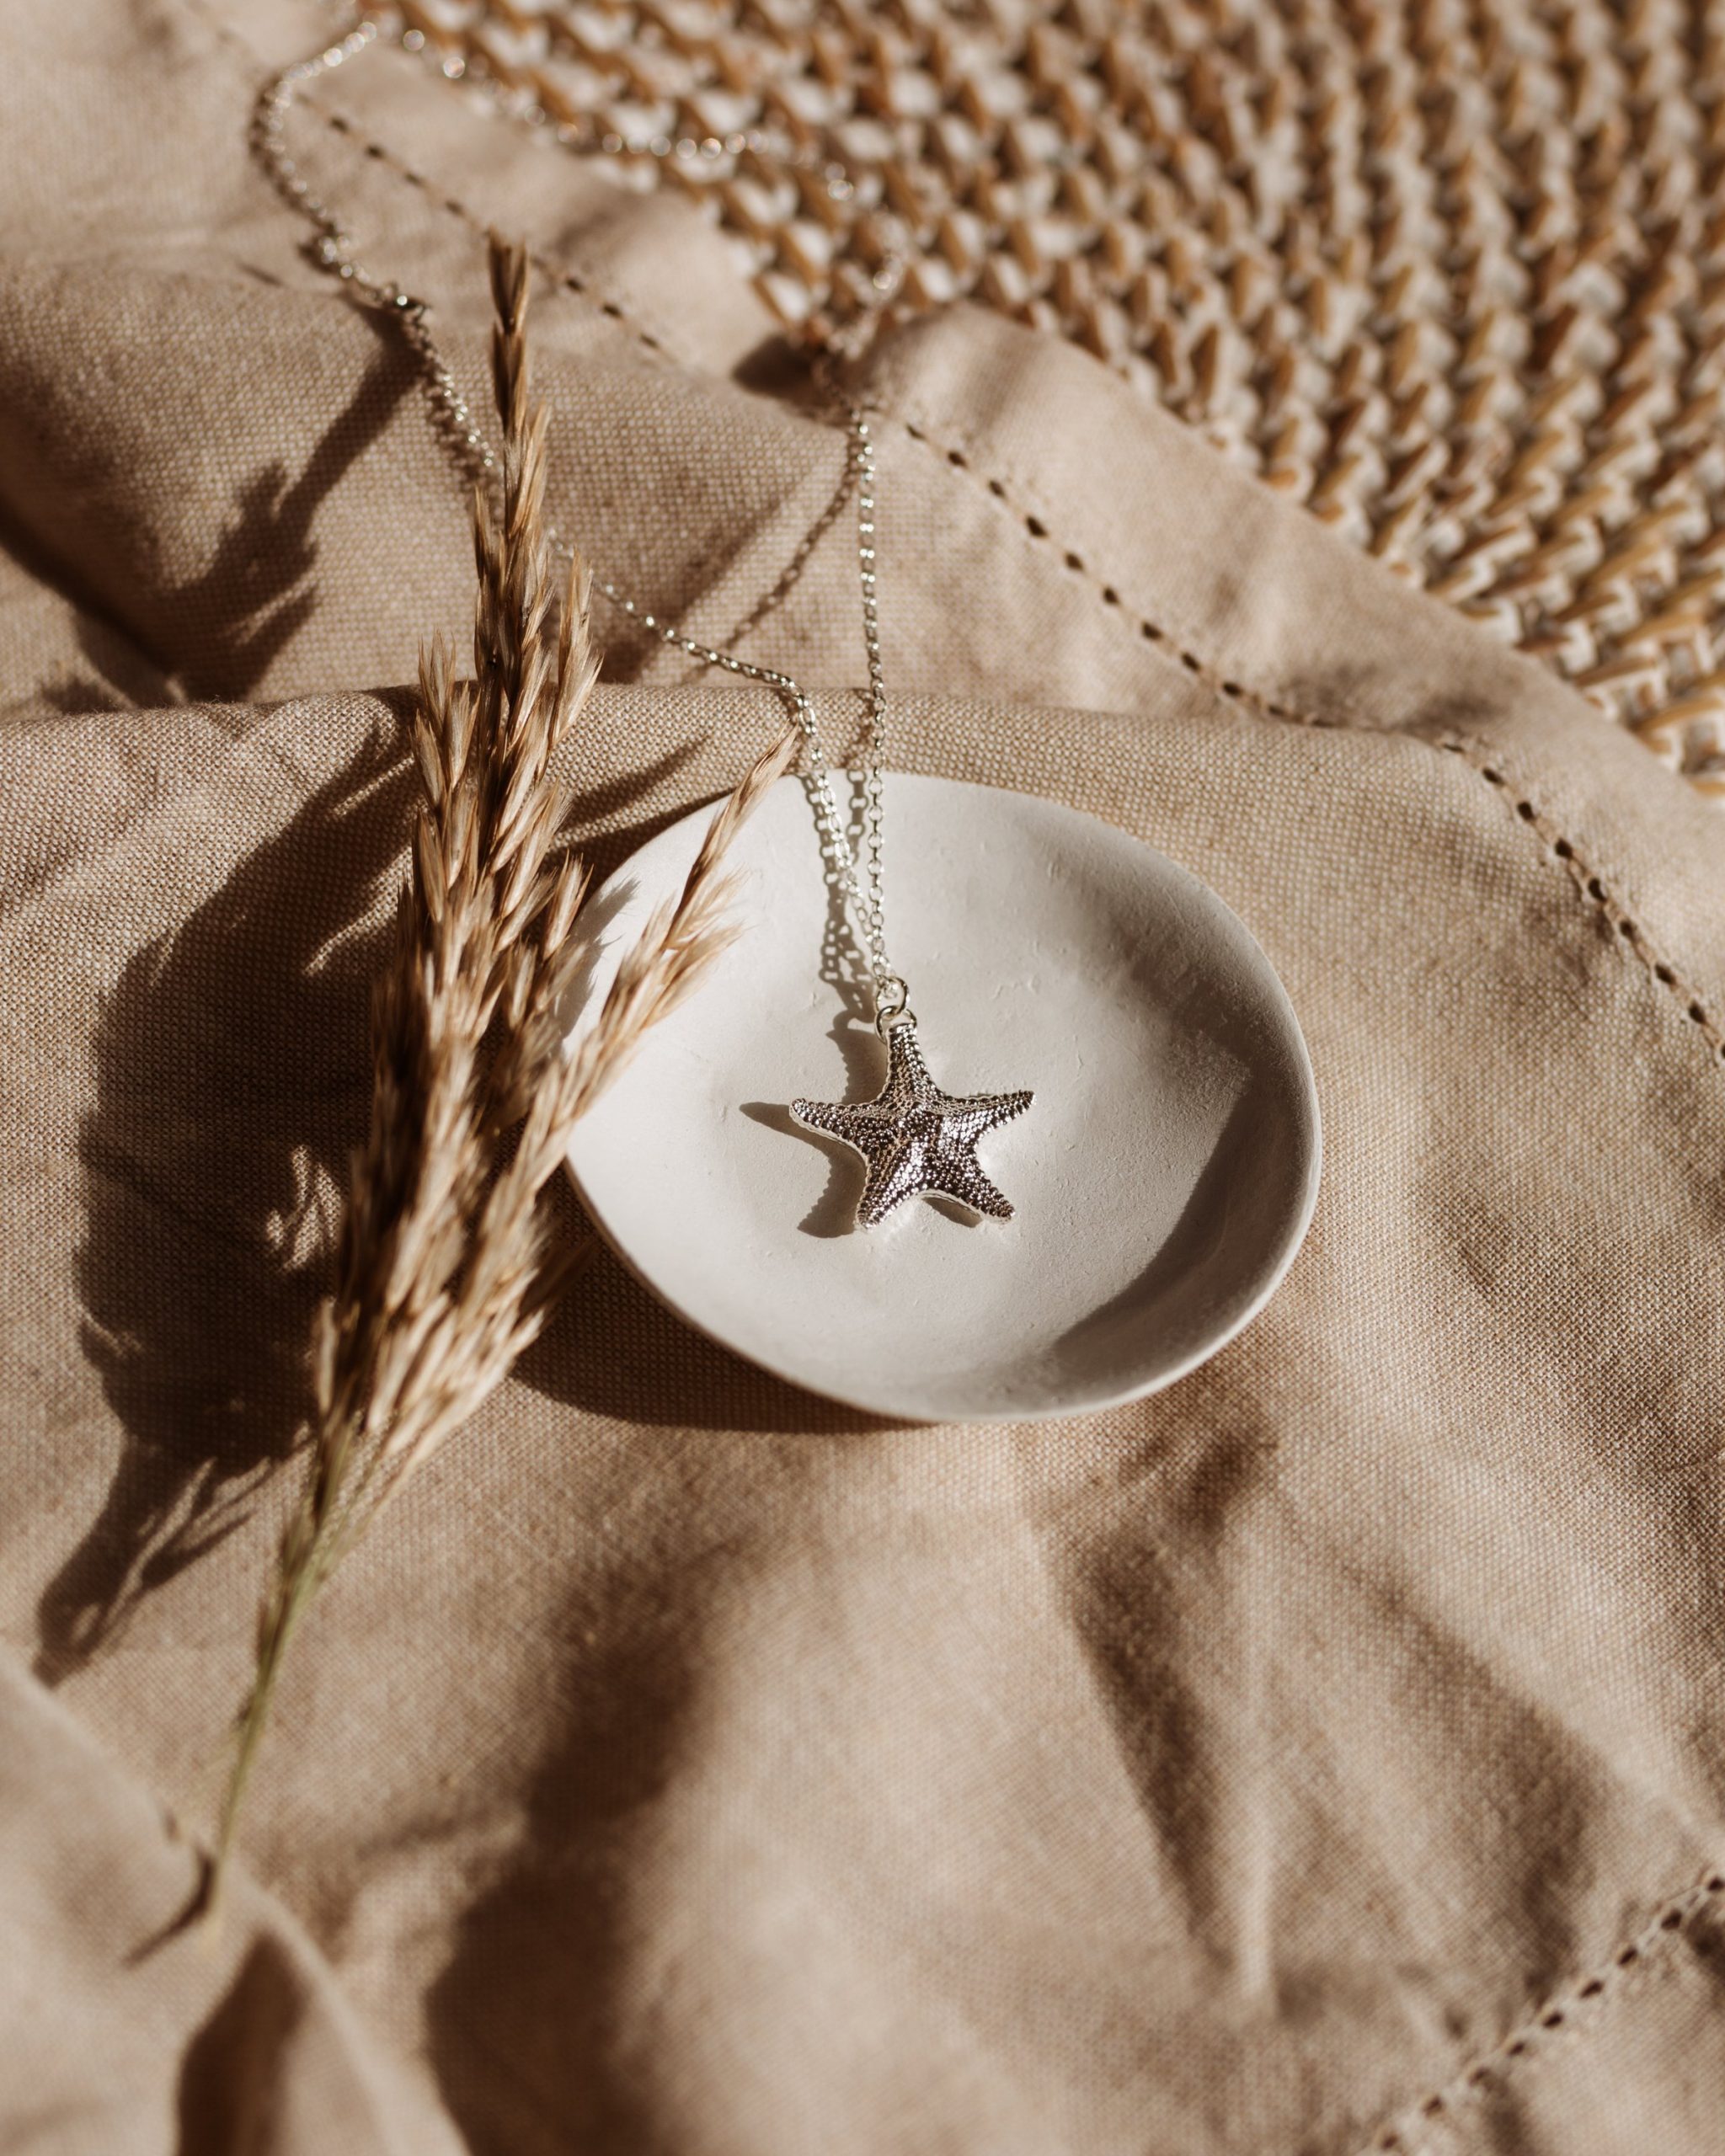 Giant silver starfish necklace